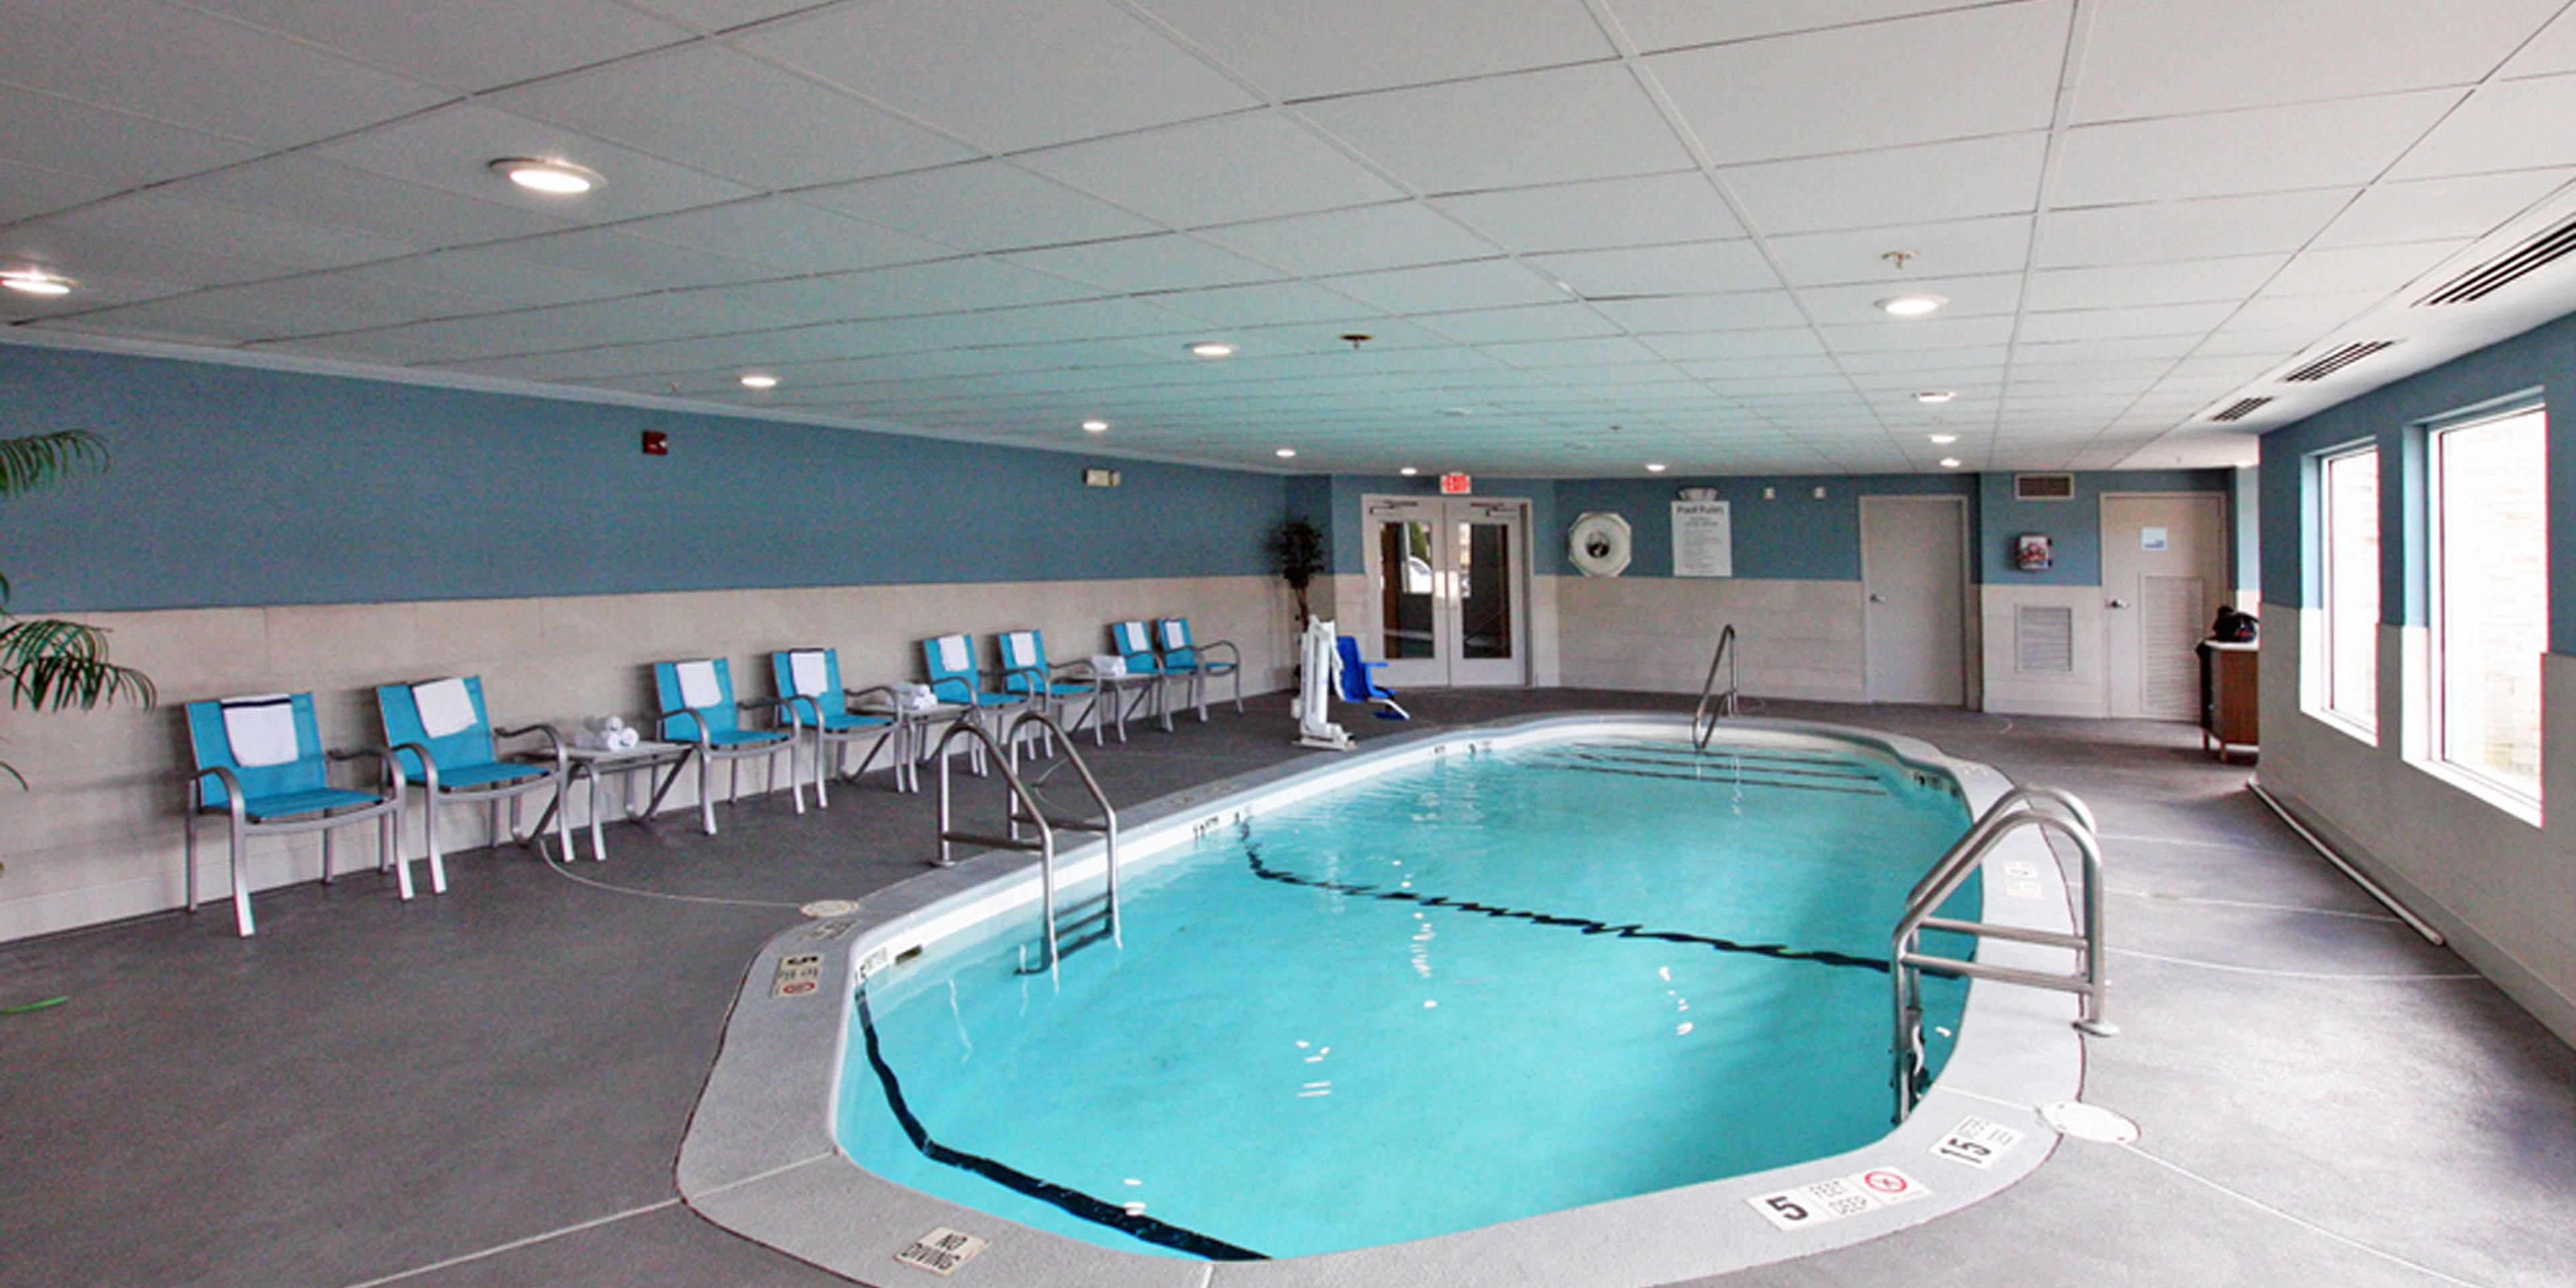 Enjoy our heated indoor pool all winter long, so when the weather is cold, enjoy a nice swim!